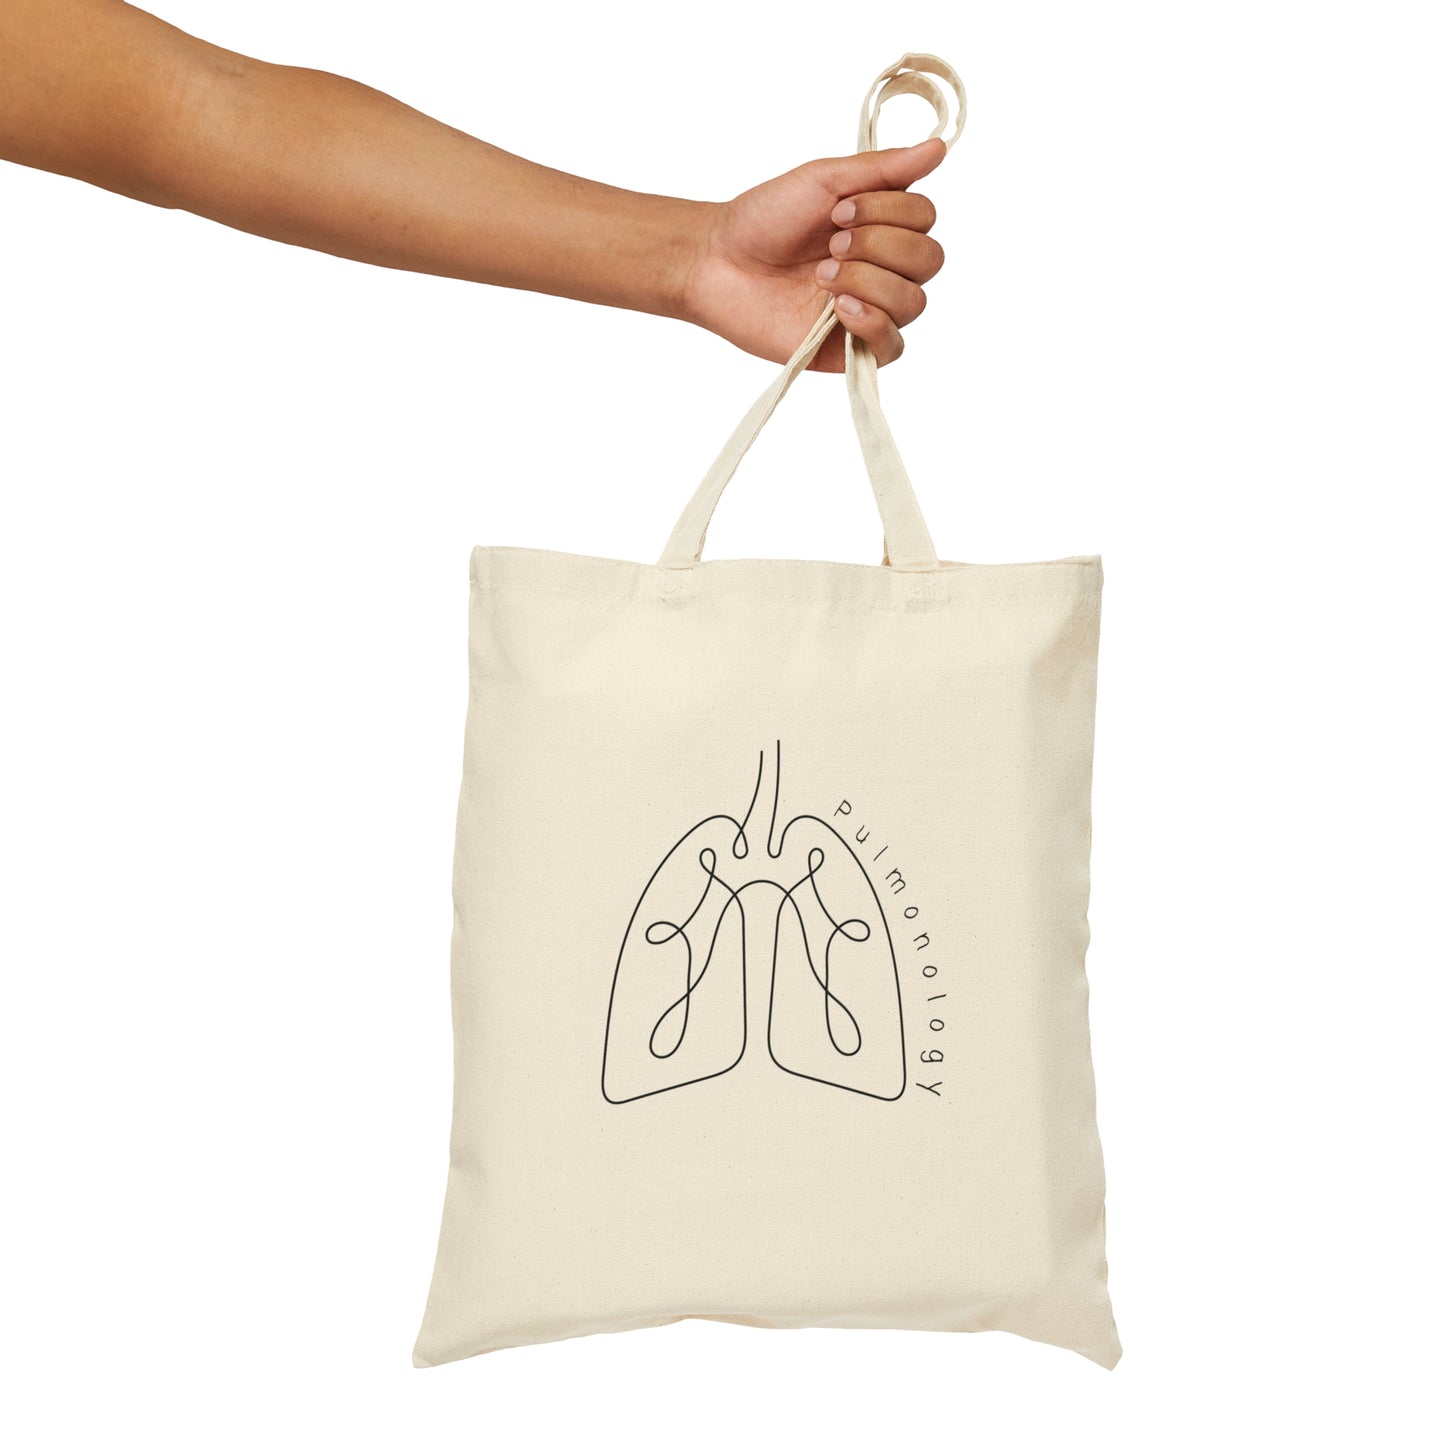 Minimalist Lungs Pulmonology work Tote Bag Cute Graduation gift for Pulmonologists and Lung RNs Anatomical Medical Resident line art